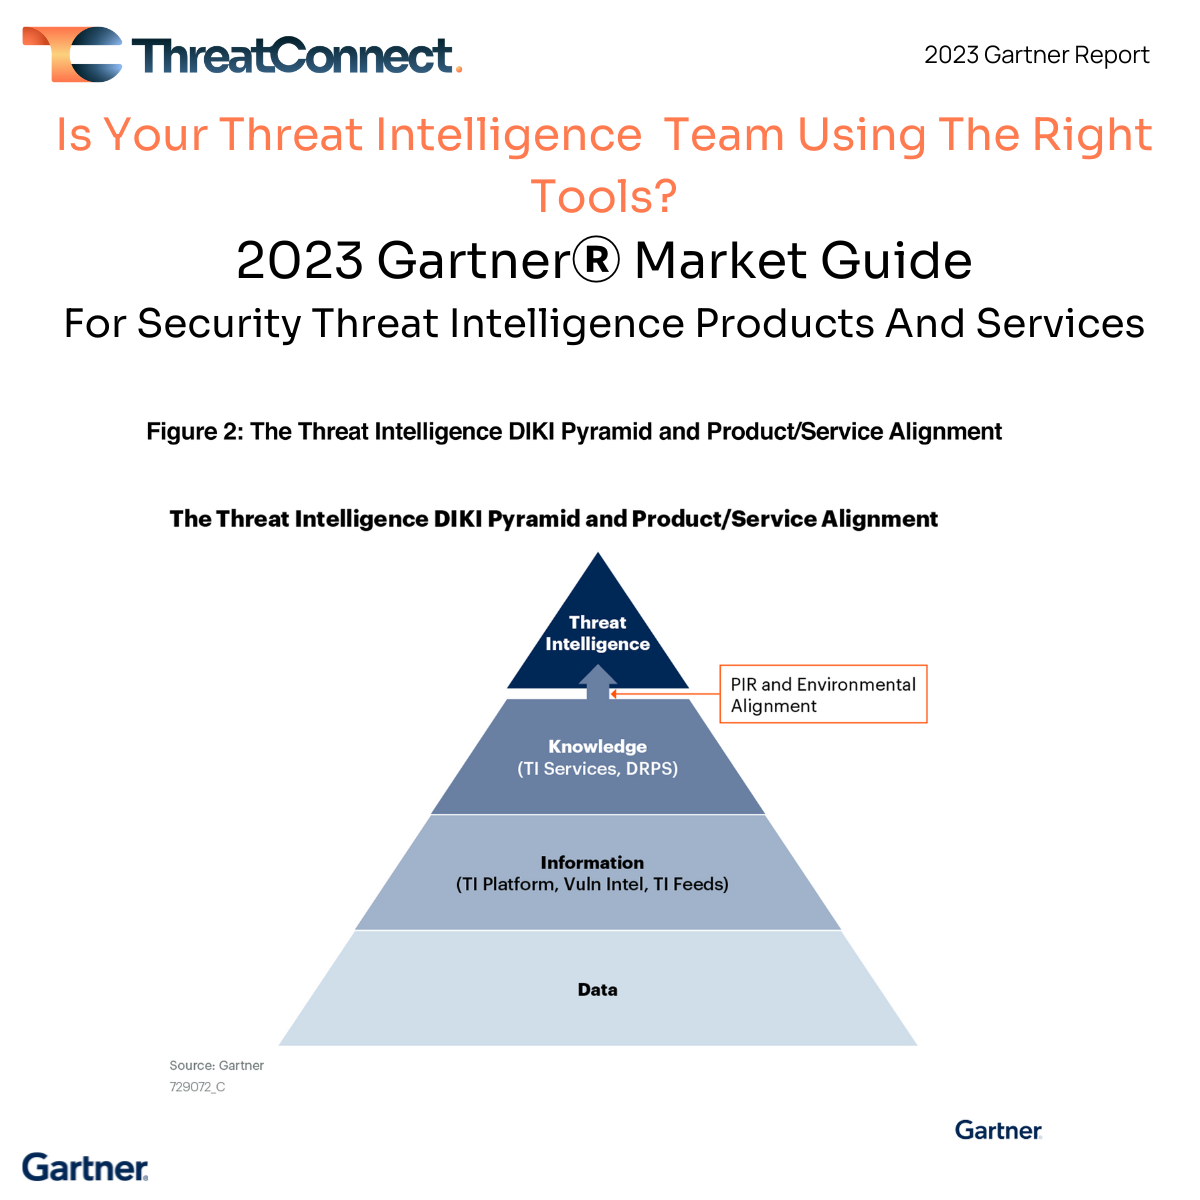 2023 Gartner Market Guide for Security Threat Intelligence Products and Services figure 2: The Threat Intelligence DIKI Pyramid and Product/Service Alignment